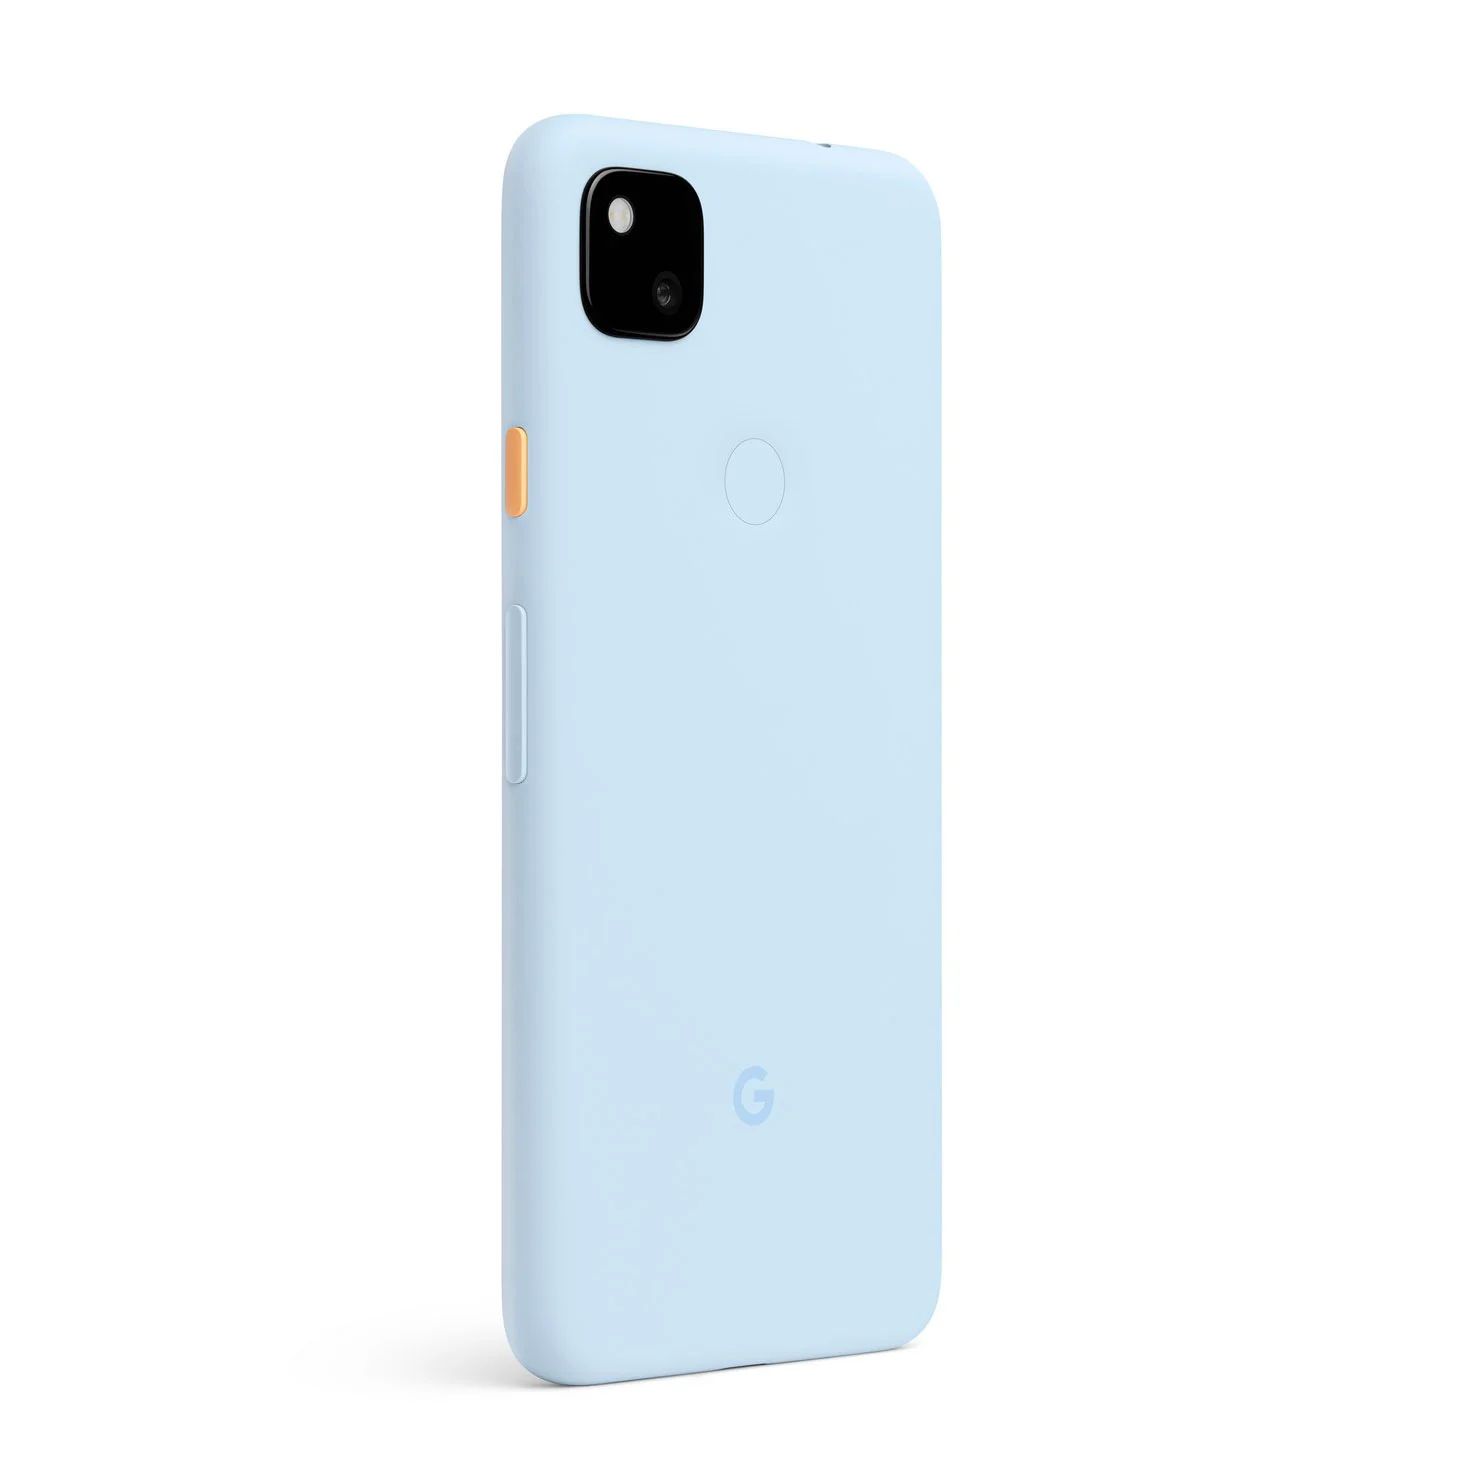 Google's Pixel 4a now comes in Barely Blue.